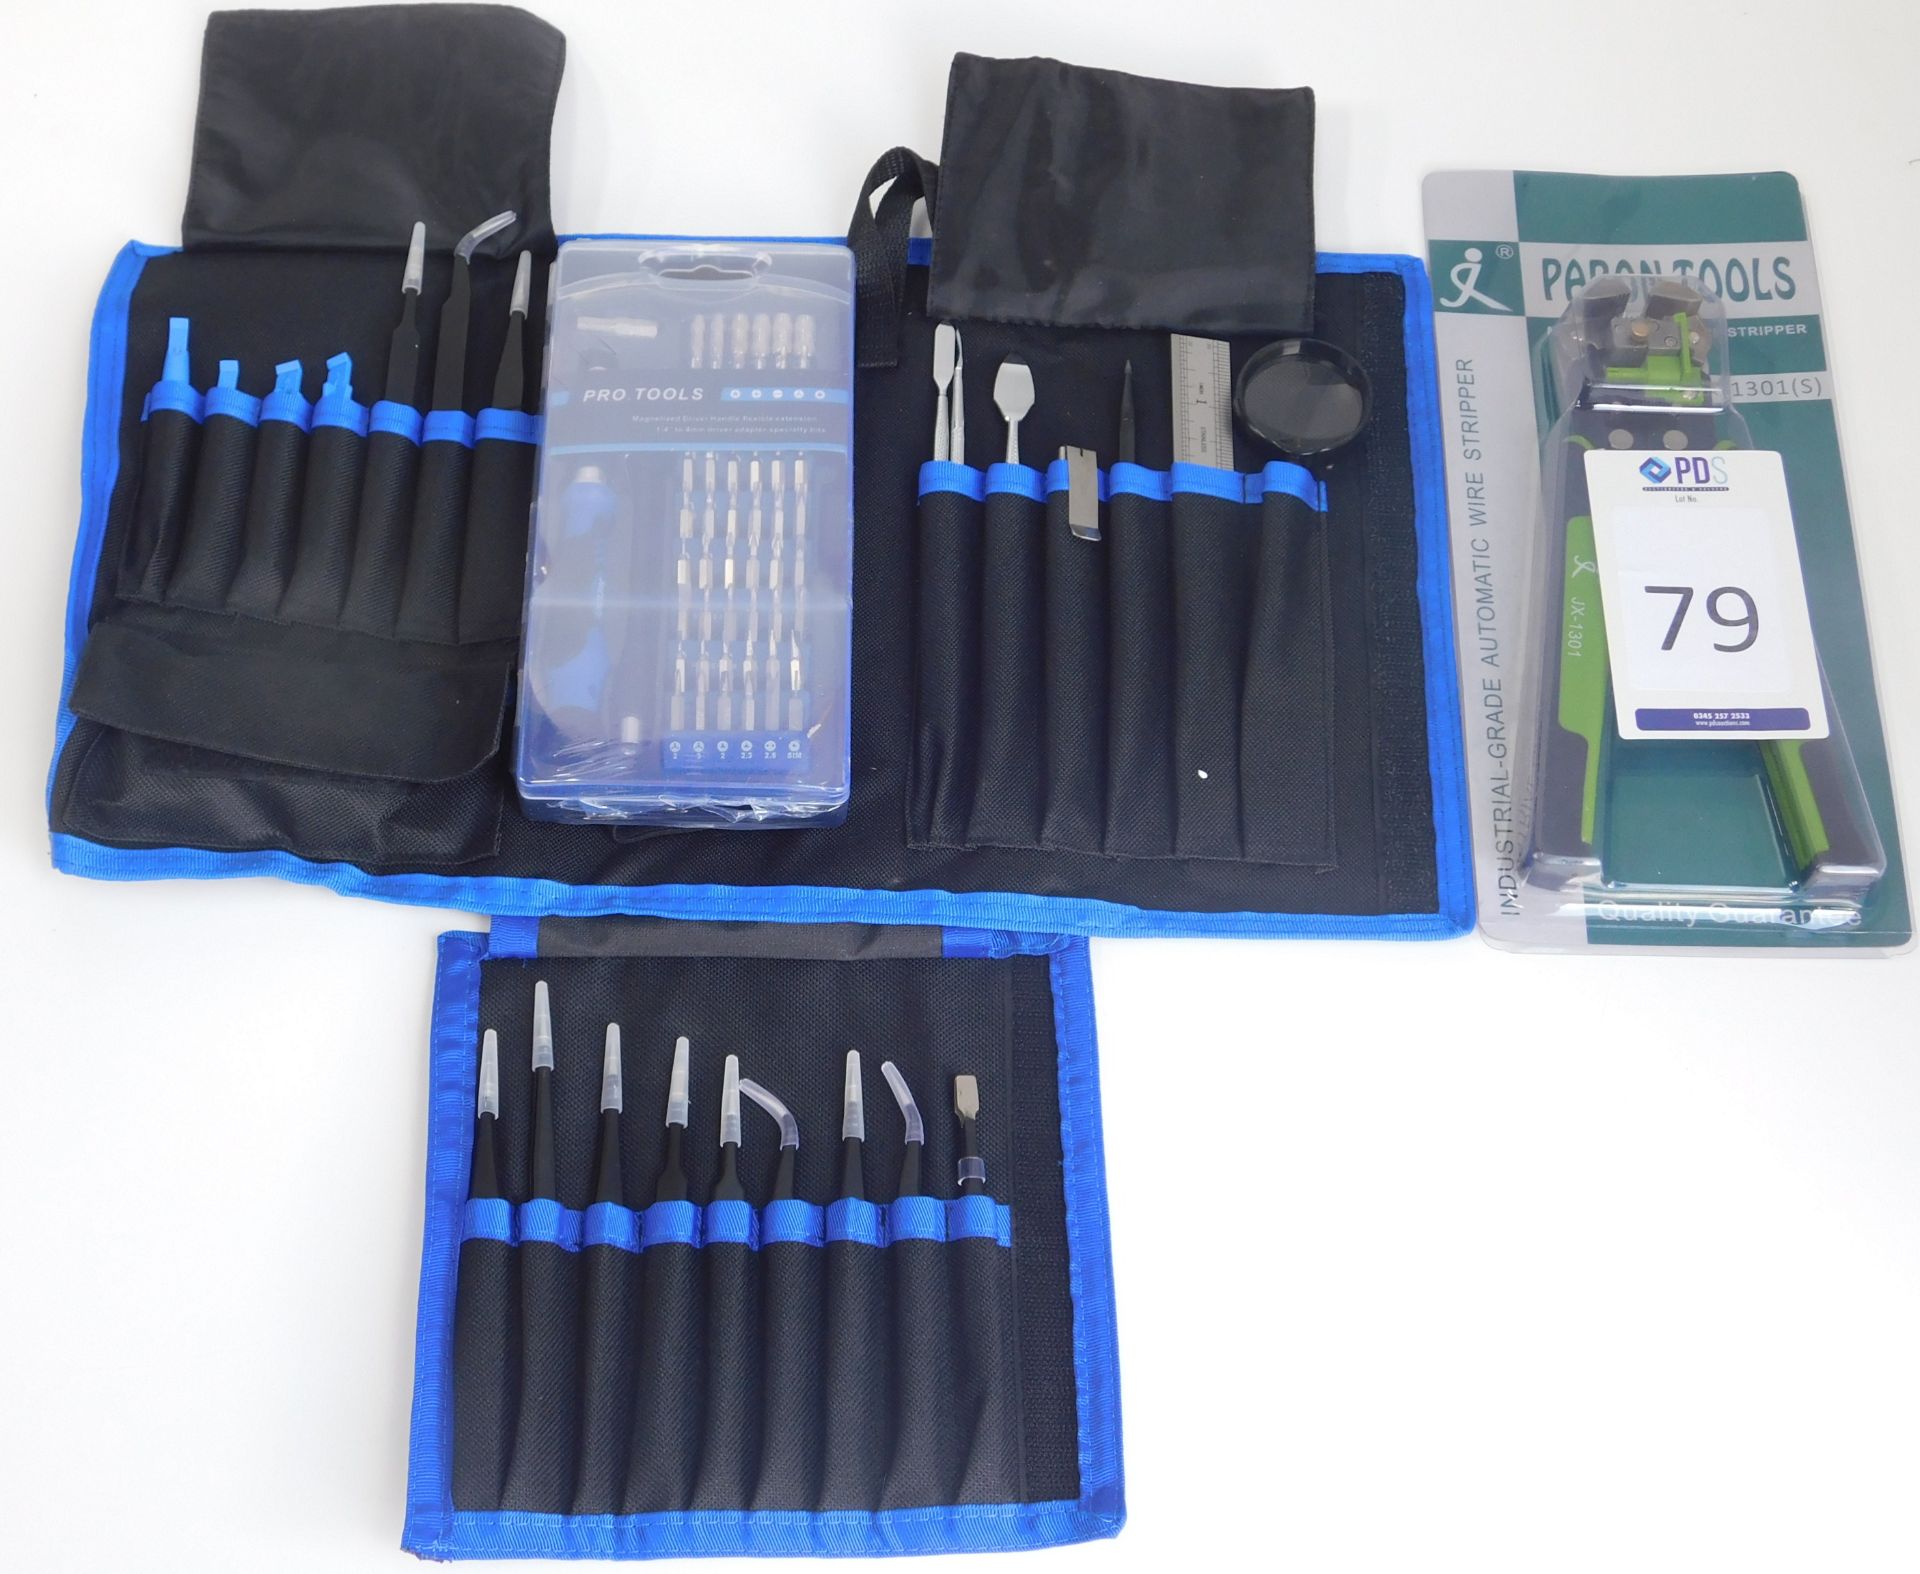 4 Paron Wire Strippers, Justech & Pixnor Micro Tool Sets (Located Brentwood, See General Notes for